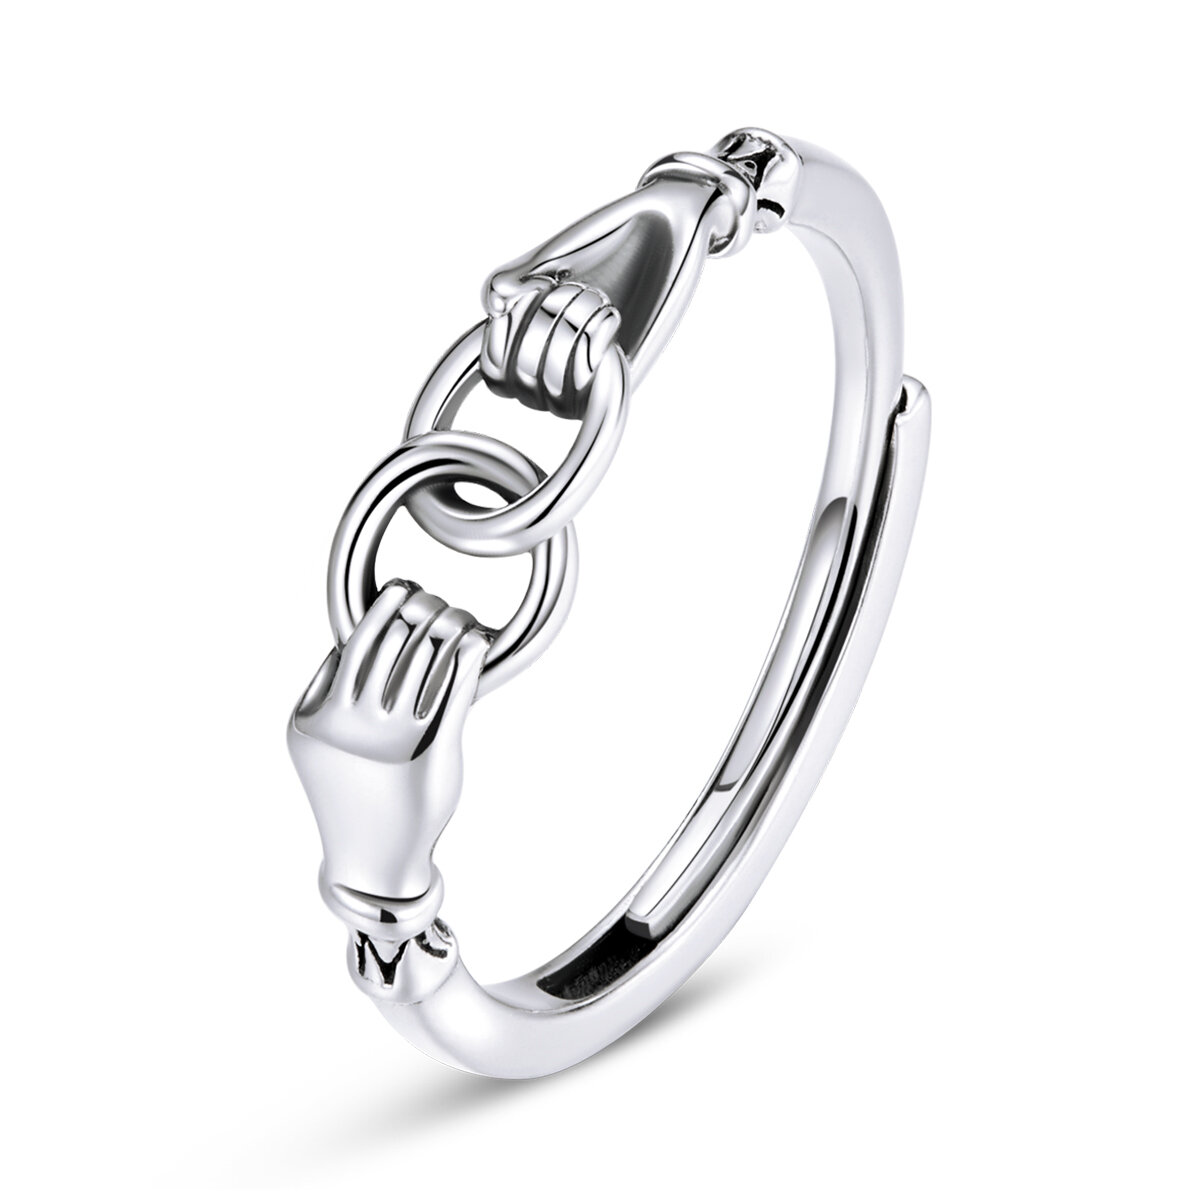 GemKing BSR183 Hand to hand S925 Sterling Silver Ring